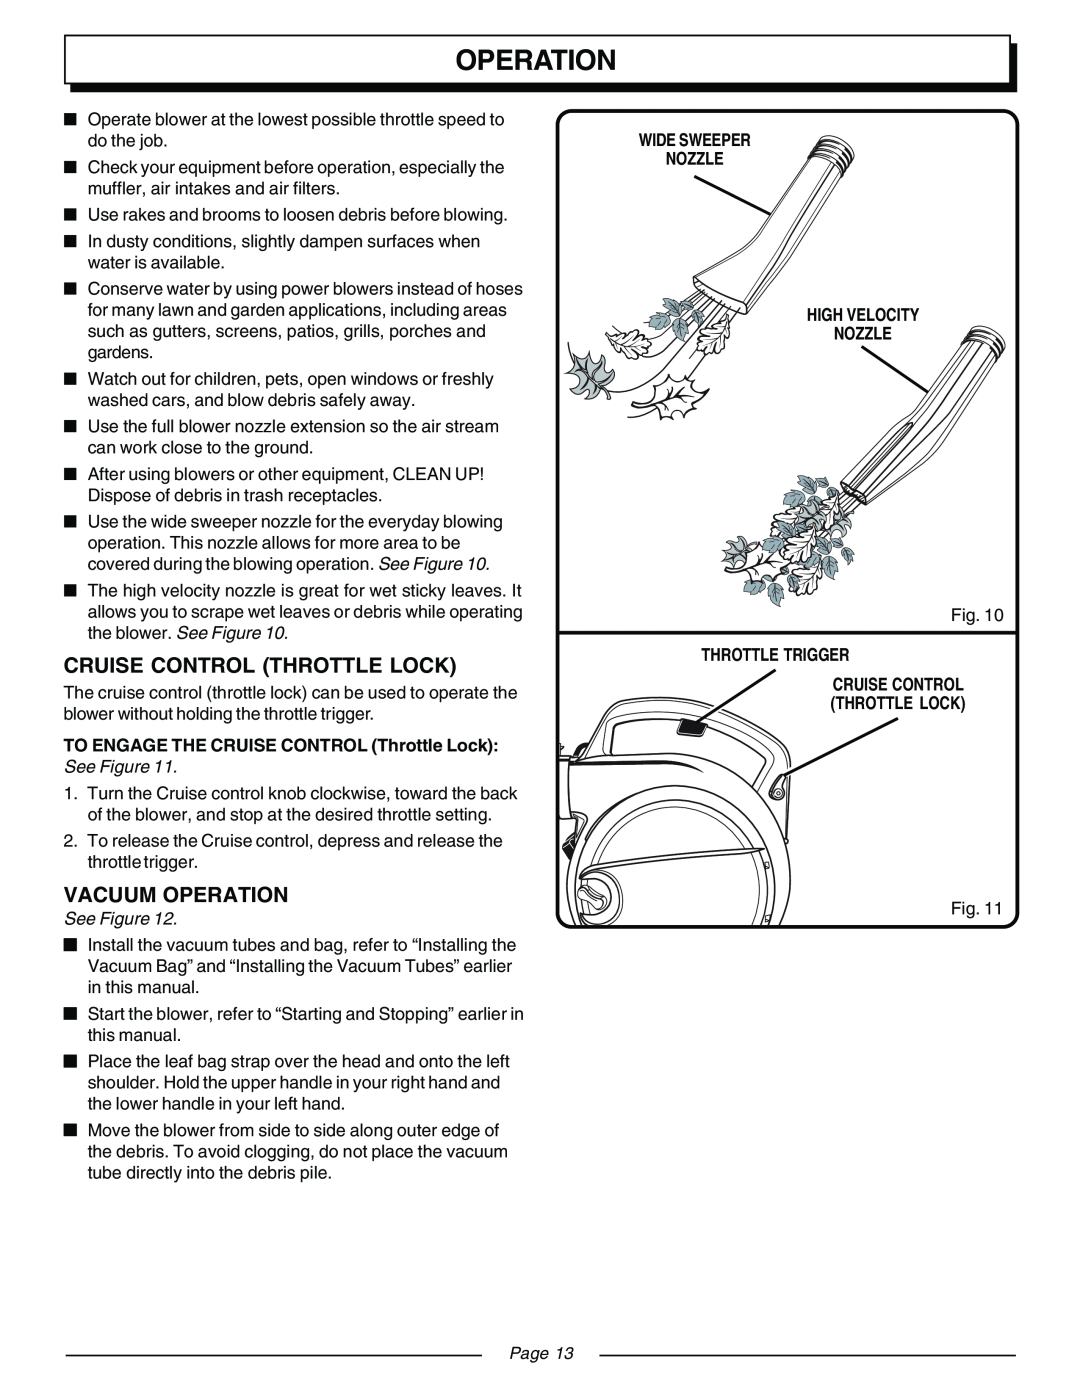 Homelite UT08540, UT08541 manual Operation, TO ENGAGE THE CRUISE CONTROL Throttle Lock, See Figure, Throttle Trigger, Page 